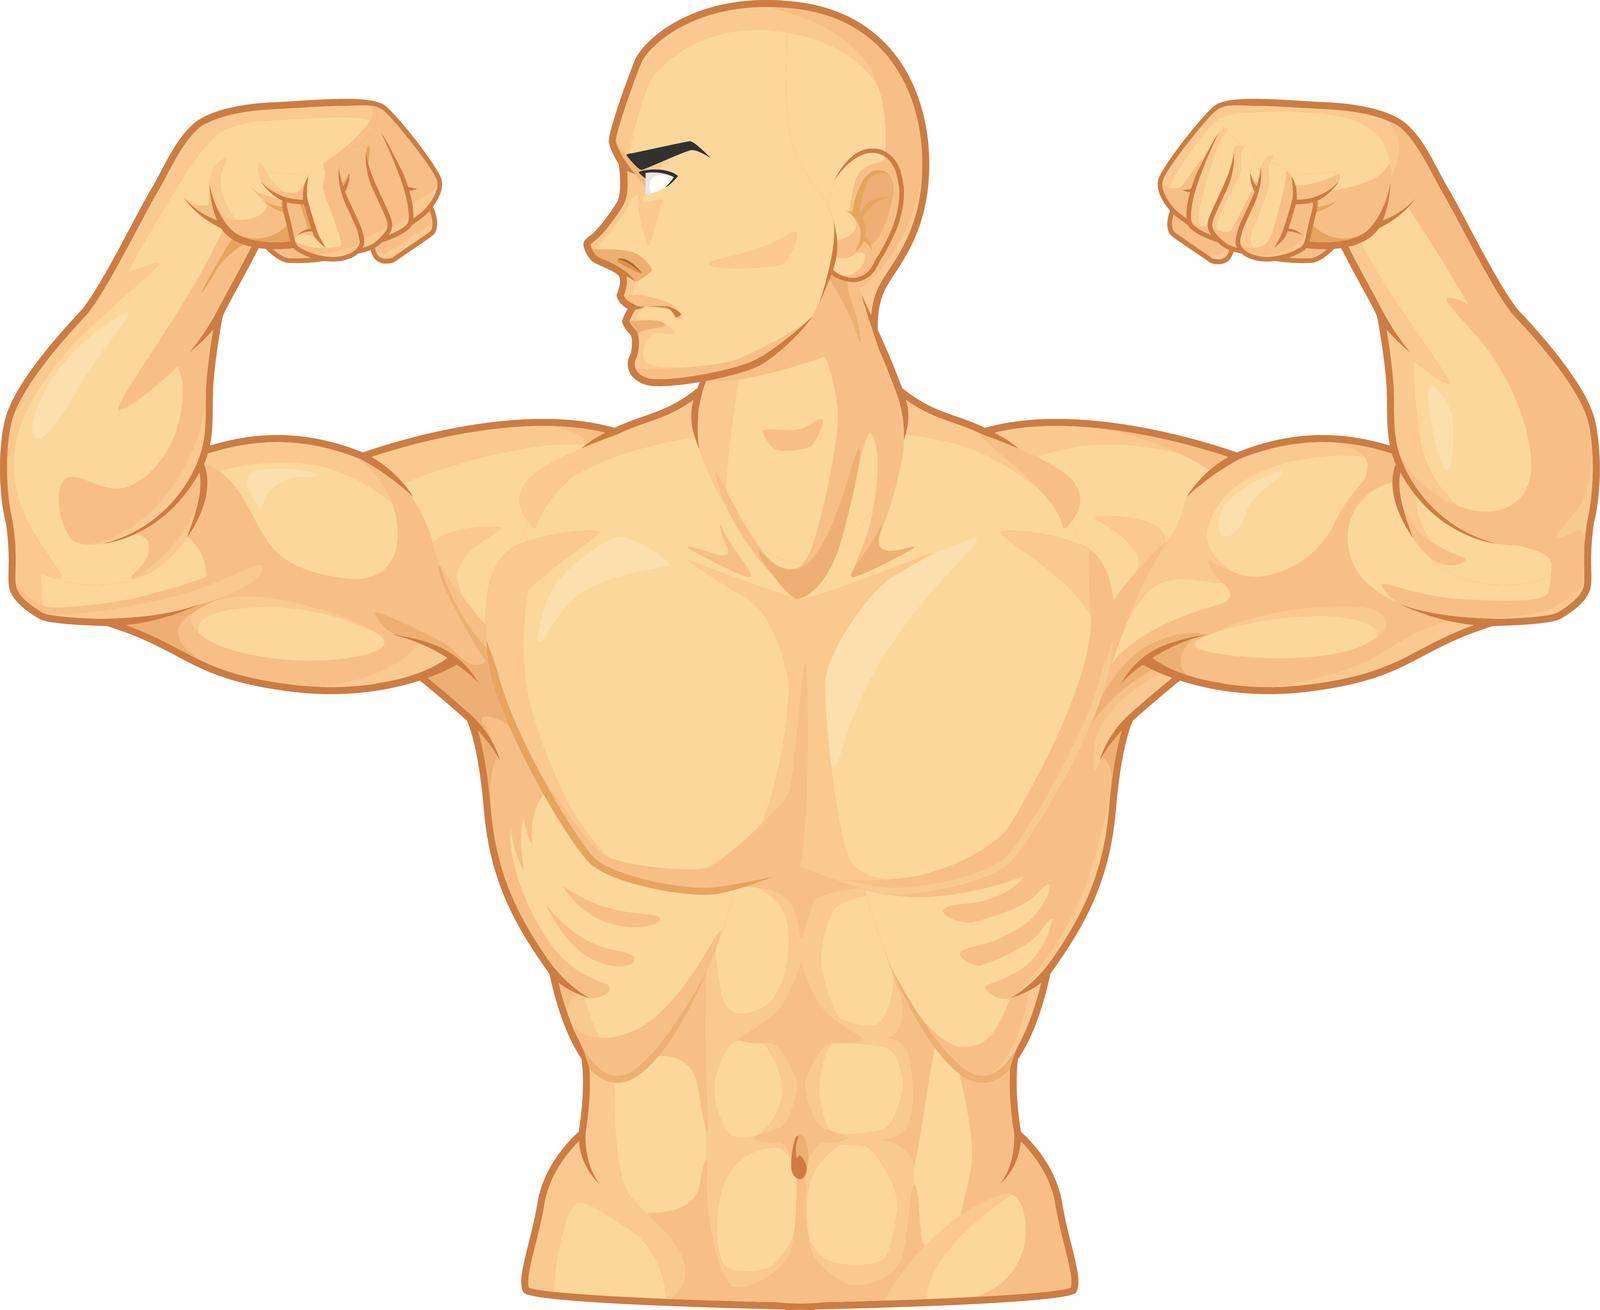 Bodybuilder Flexing Arm Bicep Muscle Cartoon Vector Drawing Isolated by BluezAce